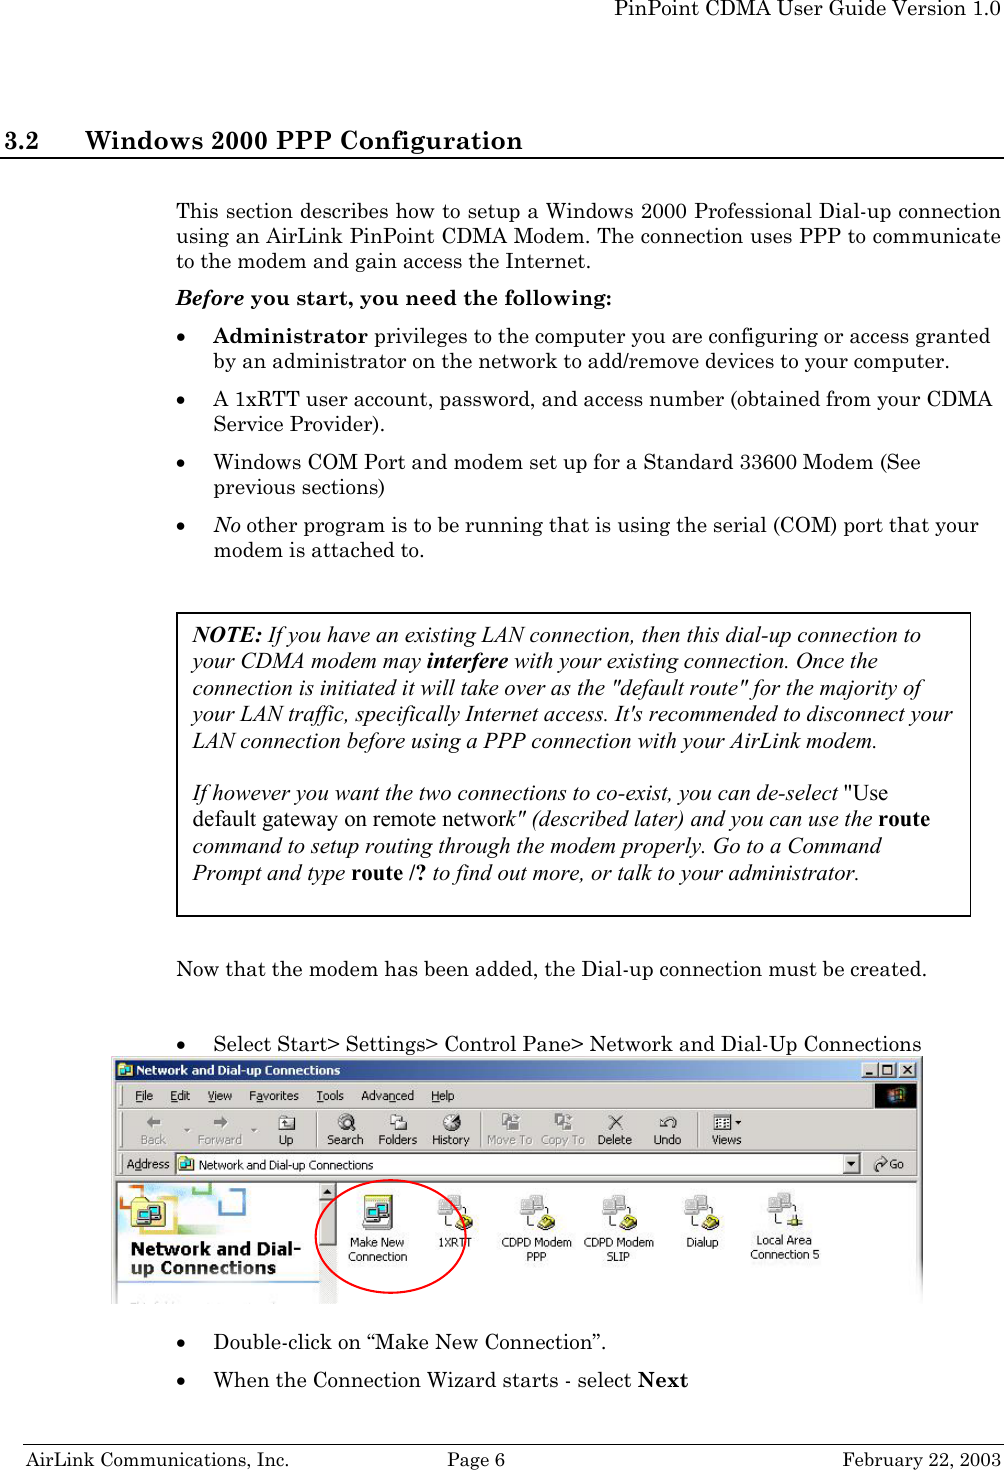   PinPoint CDMA User Guide Version 1.0   AirLink Communications, Inc.  Page 6  February 22, 2003 3.2 Windows 2000 PPP Configuration  This section describes how to setup a Windows 2000 Professional Dial-up connection using an AirLink PinPoint CDMA Modem. The connection uses PPP to communicate to the modem and gain access the Internet. Before you start, you need the following: • Administrator privileges to the computer you are configuring or access granted by an administrator on the network to add/remove devices to your computer. • A 1xRTT user account, password, and access number (obtained from your CDMA Service Provider). • Windows COM Port and modem set up for a Standard 33600 Modem (See previous sections) • No other program is to be running that is using the serial (COM) port that your modem is attached to.     Now that the modem has been added, the Dial-up connection must be created.  • Select Start&gt; Settings&gt; Control Pane&gt; Network and Dial-Up Connections    • Double-click on “Make New Connection”.  • When the Connection Wizard starts - select Next NOTE: If you have an existing LAN connection, then this dial-up connection to your CDMA modem may interfere with your existing connection. Once the connection is initiated it will take over as the &quot;default route&quot; for the majority of your LAN traffic, specifically Internet access. It&apos;s recommended to disconnect your LAN connection before using a PPP connection with your AirLink modem.  If however you want the two connections to co-exist, you can de-select &quot;Use default gateway on remote network&quot; (described later) and you can use the route command to setup routing through the modem properly. Go to a Command Prompt and type route /? to find out more, or talk to your administrator. 